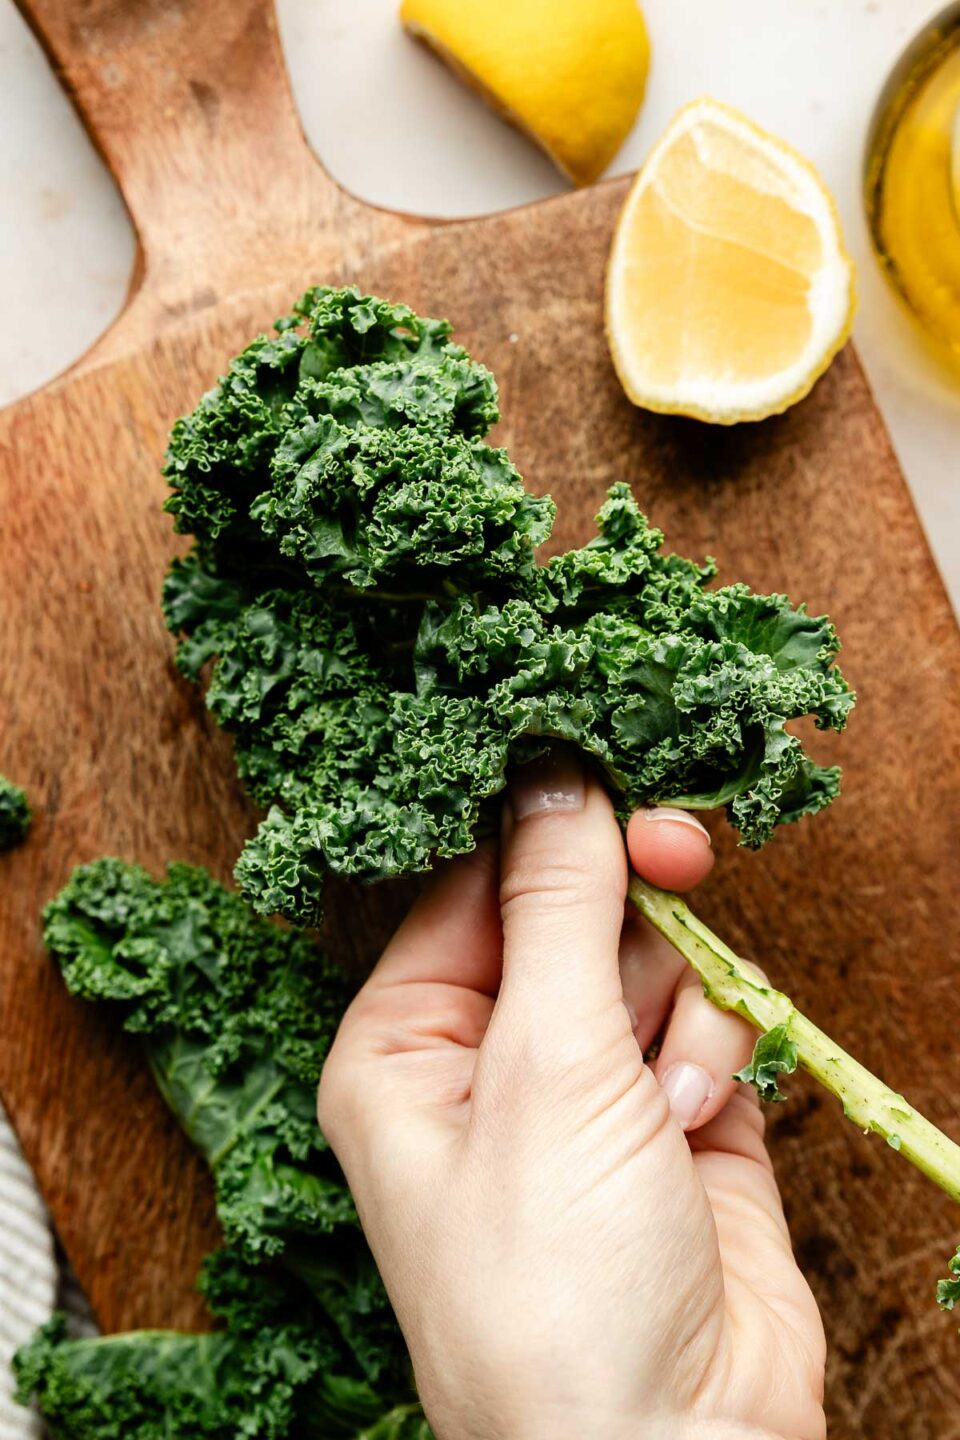 An overhead shot of a woman's hand de-stemming a stalk of kale over a wooden board. Lemon wedges sit on the board and beside it on a white surface.